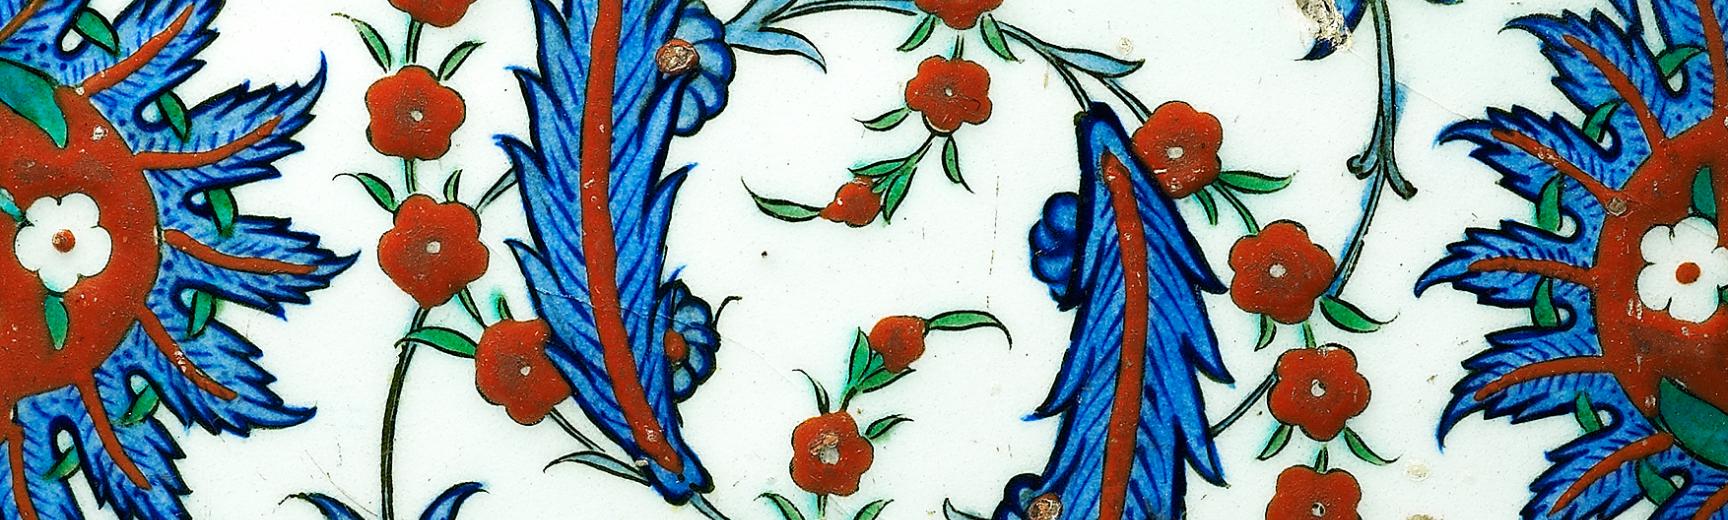 Tile with serrated leaves and flowers, 16th Century, Turkey